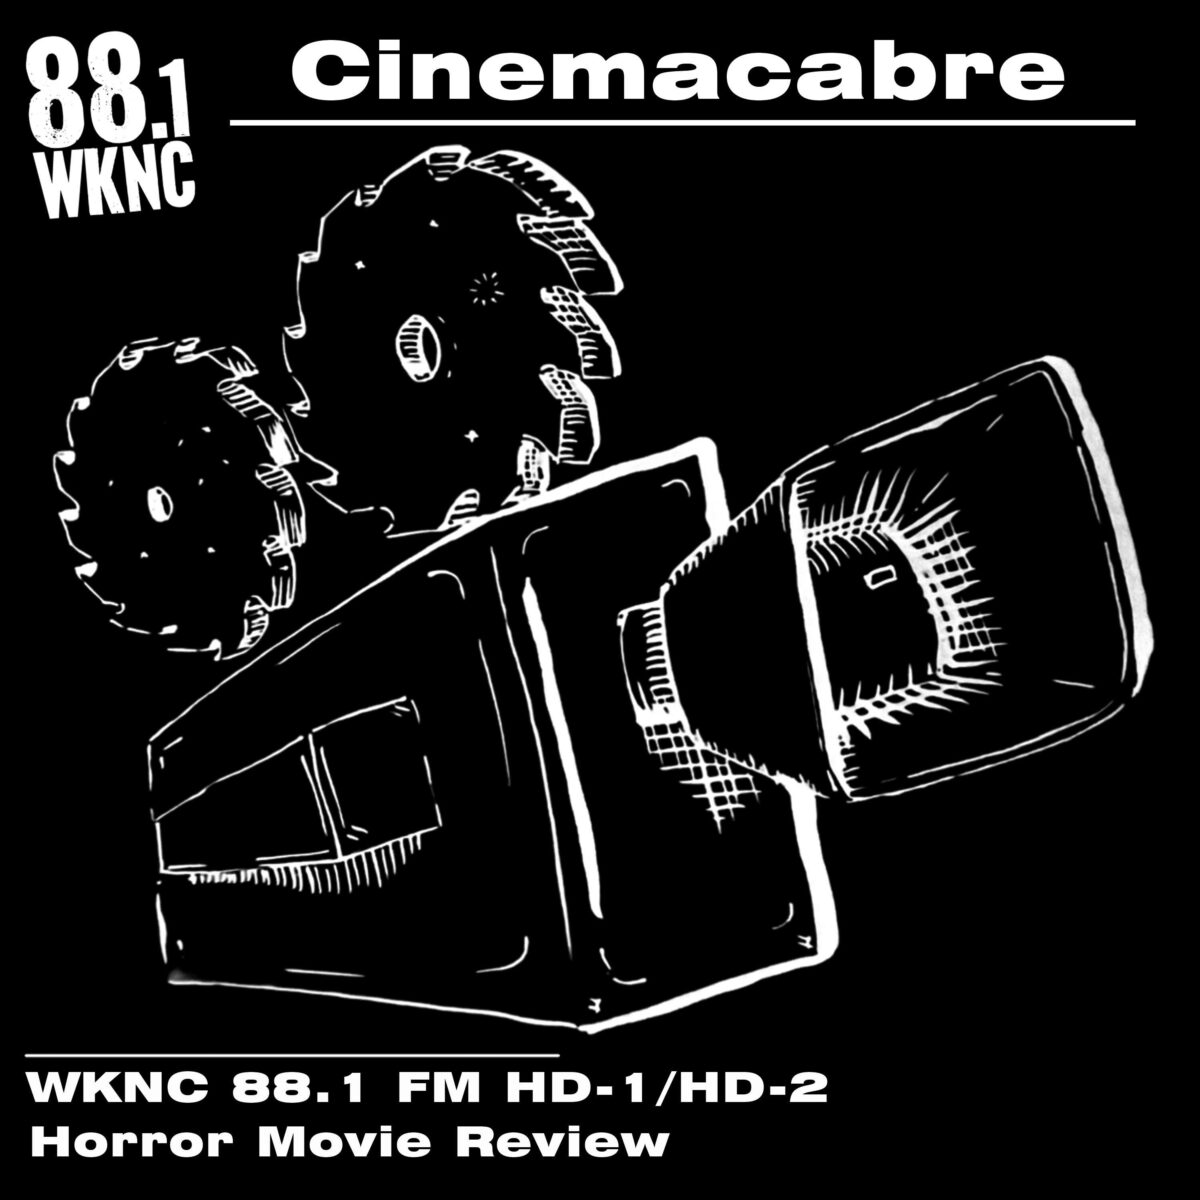 Her's - A Band That Could Have Been - WKNC 88.1 FM